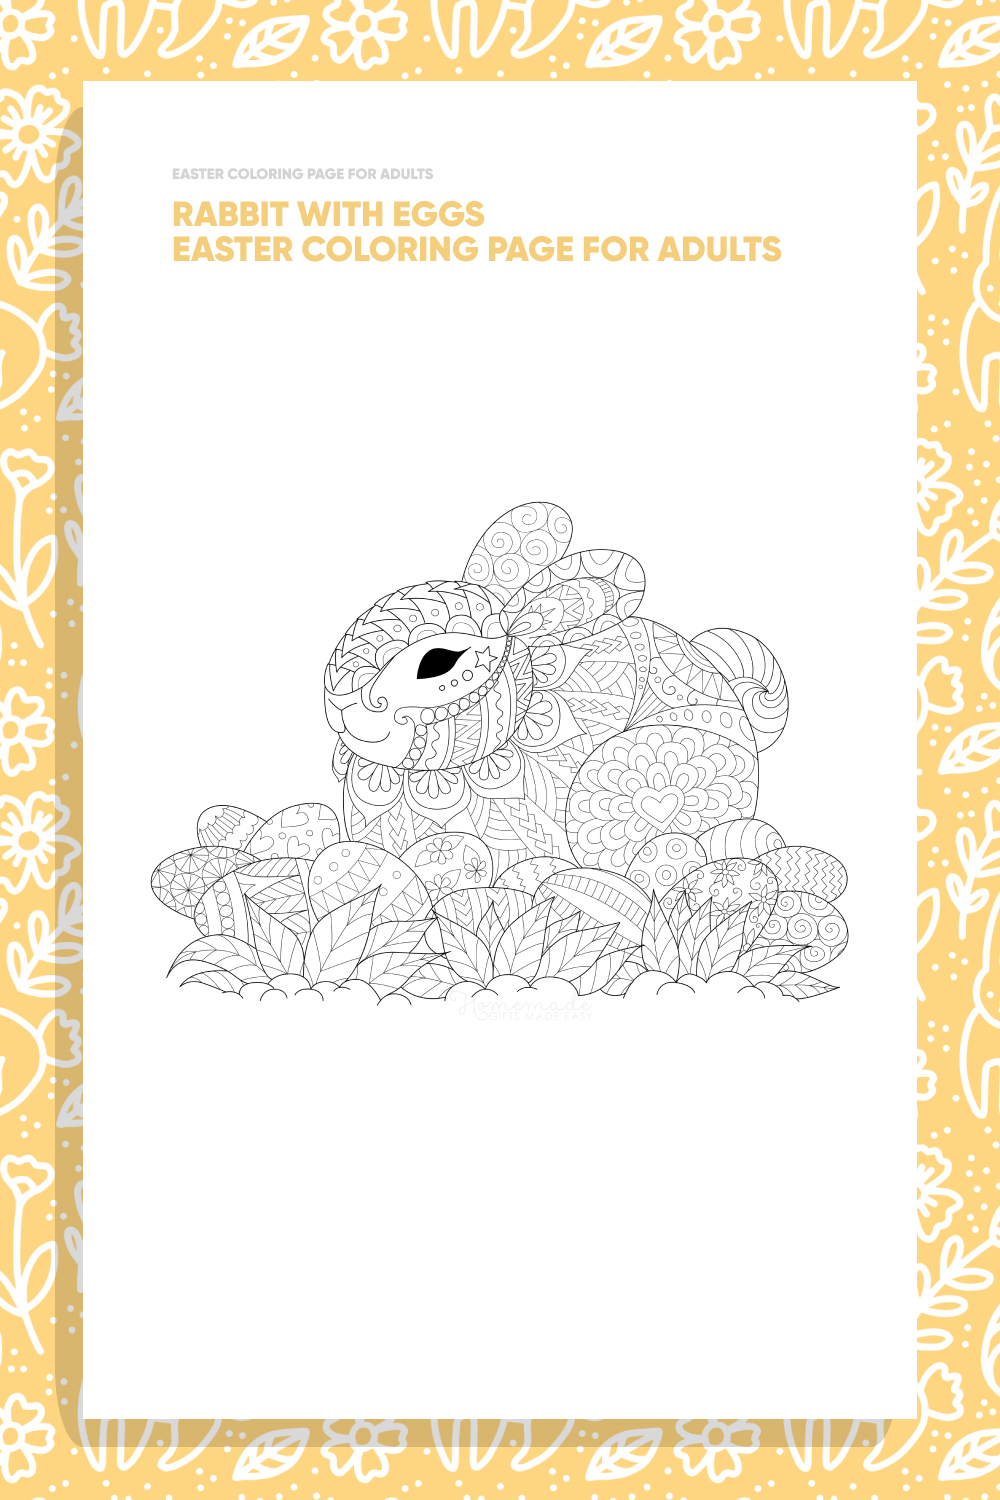 Rabbit with Eggs Easter Coloring Page for Adults pinterest image.